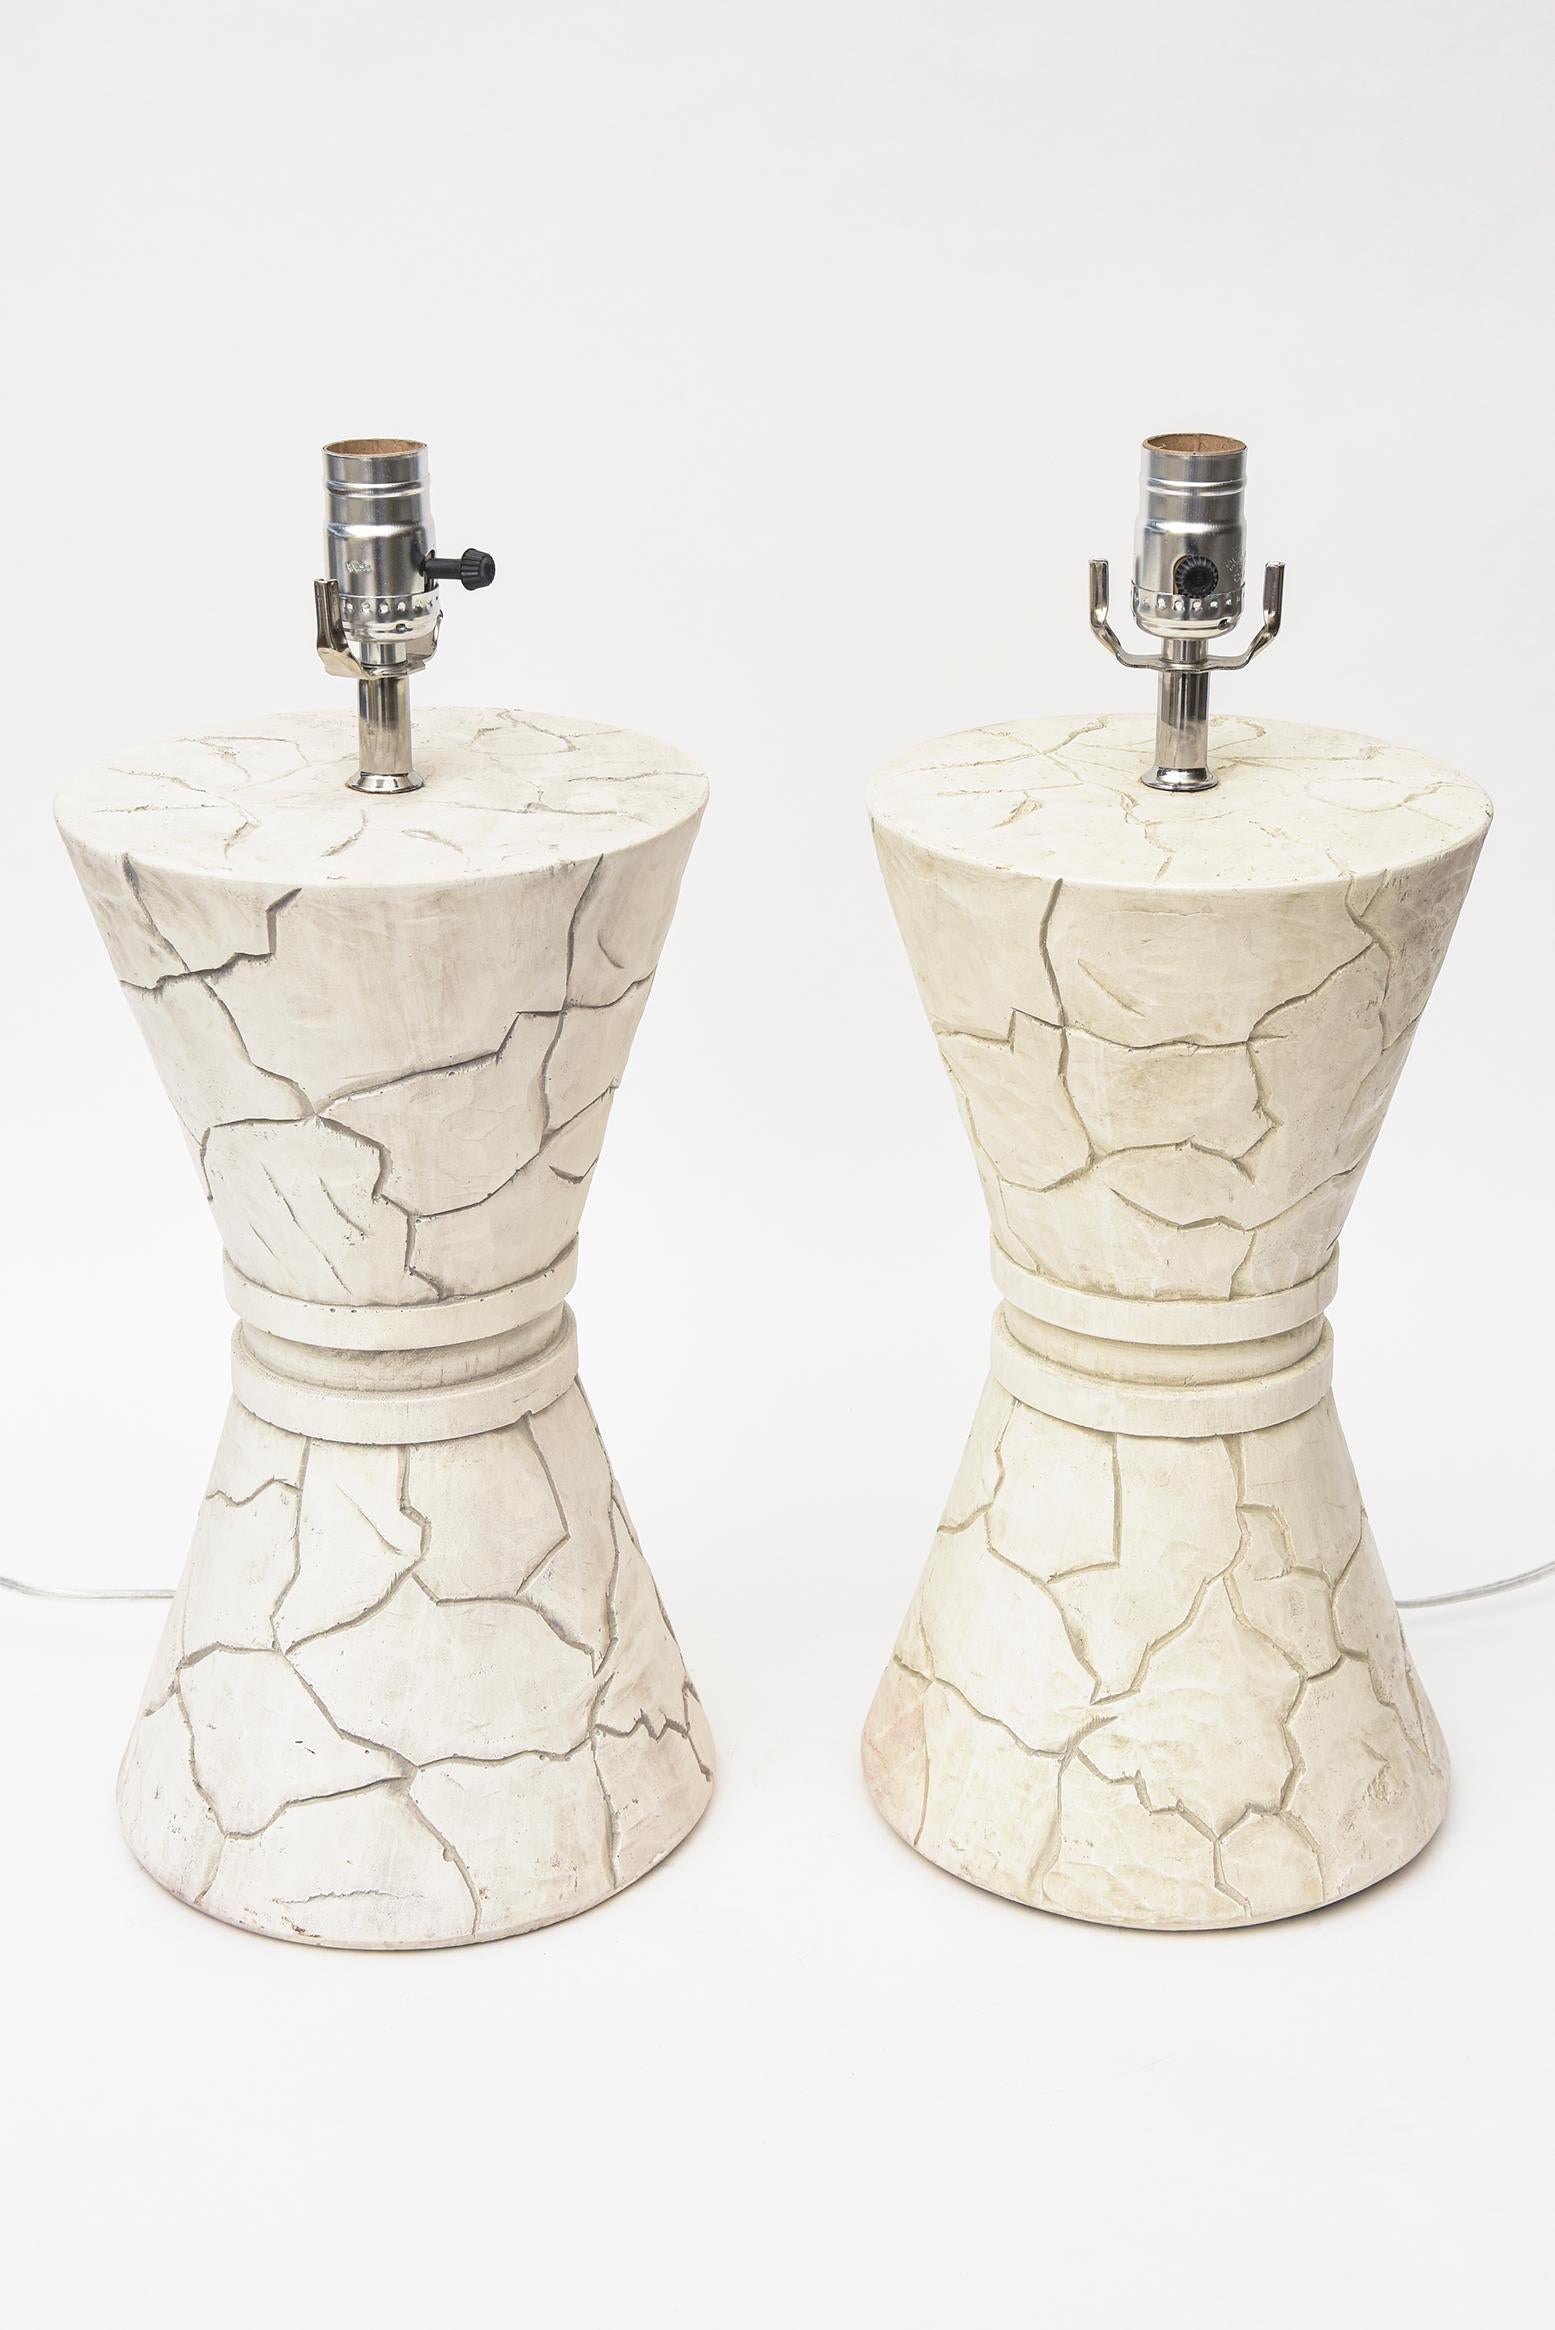 Vintage Organic Modern Off White Signed Japanese Ceramic Pebbled Lamps Pair Of In Good Condition For Sale In North Miami, FL